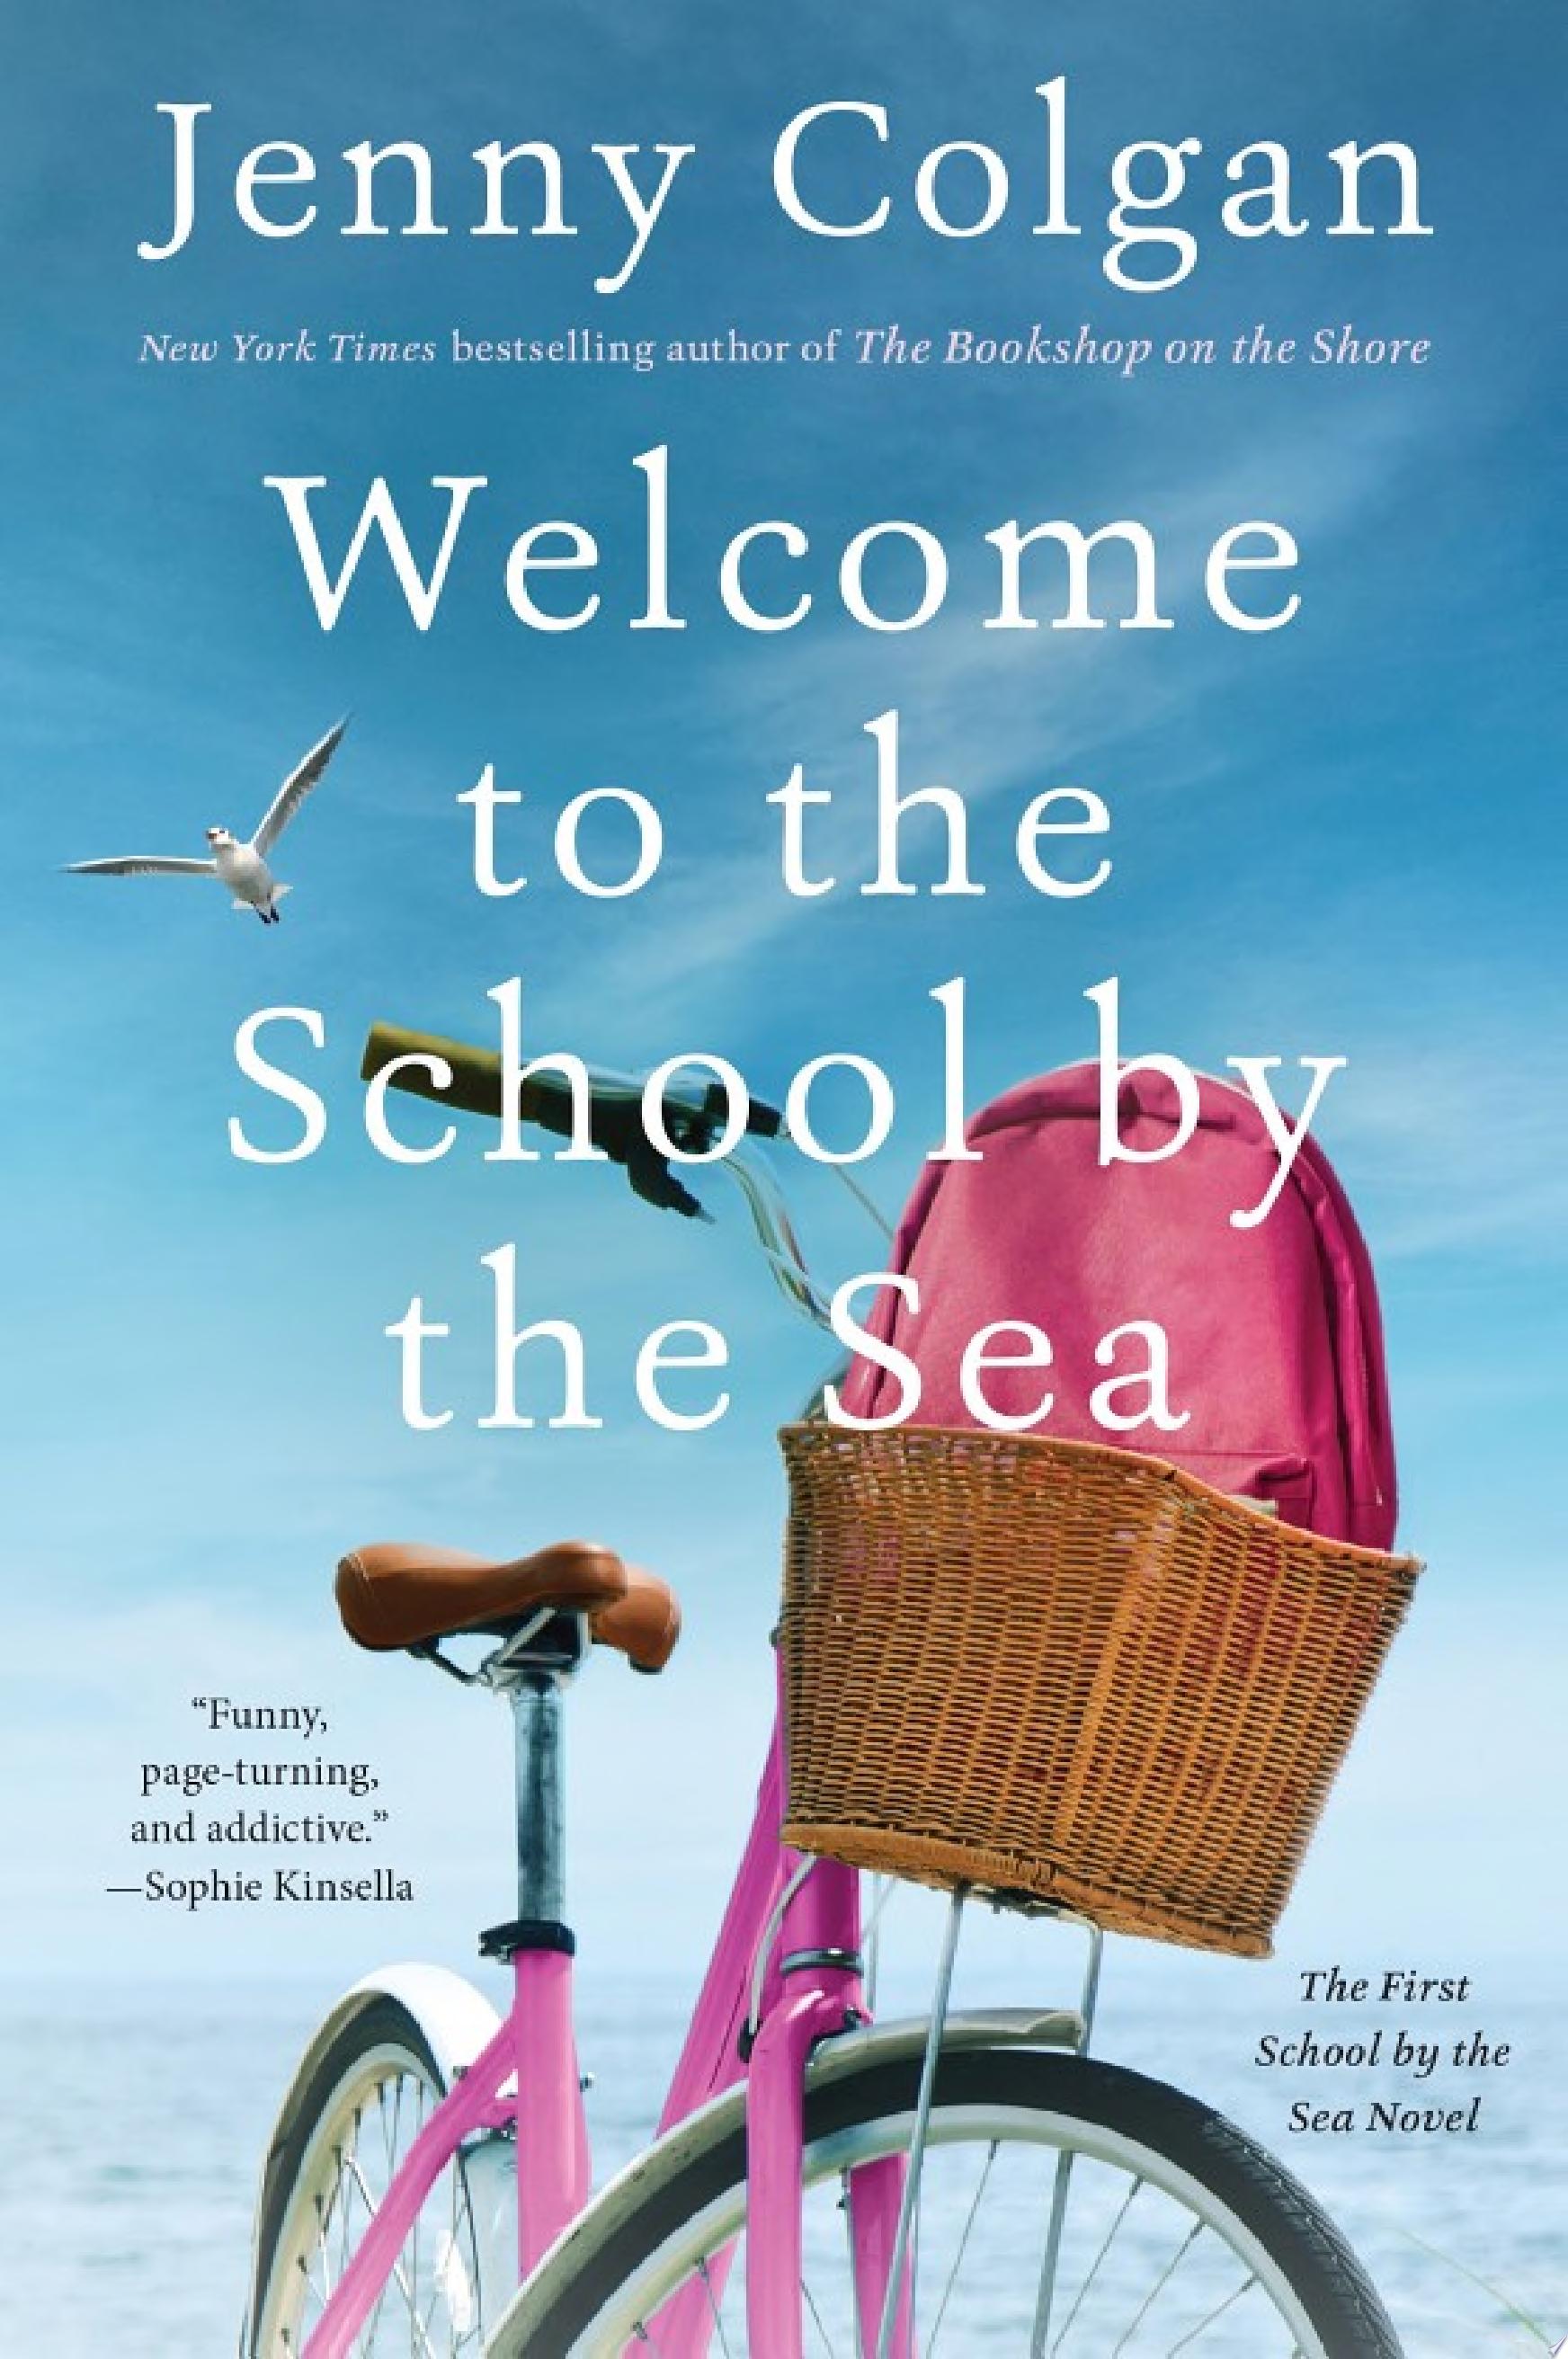 Image for "Welcome to the School by the Sea"